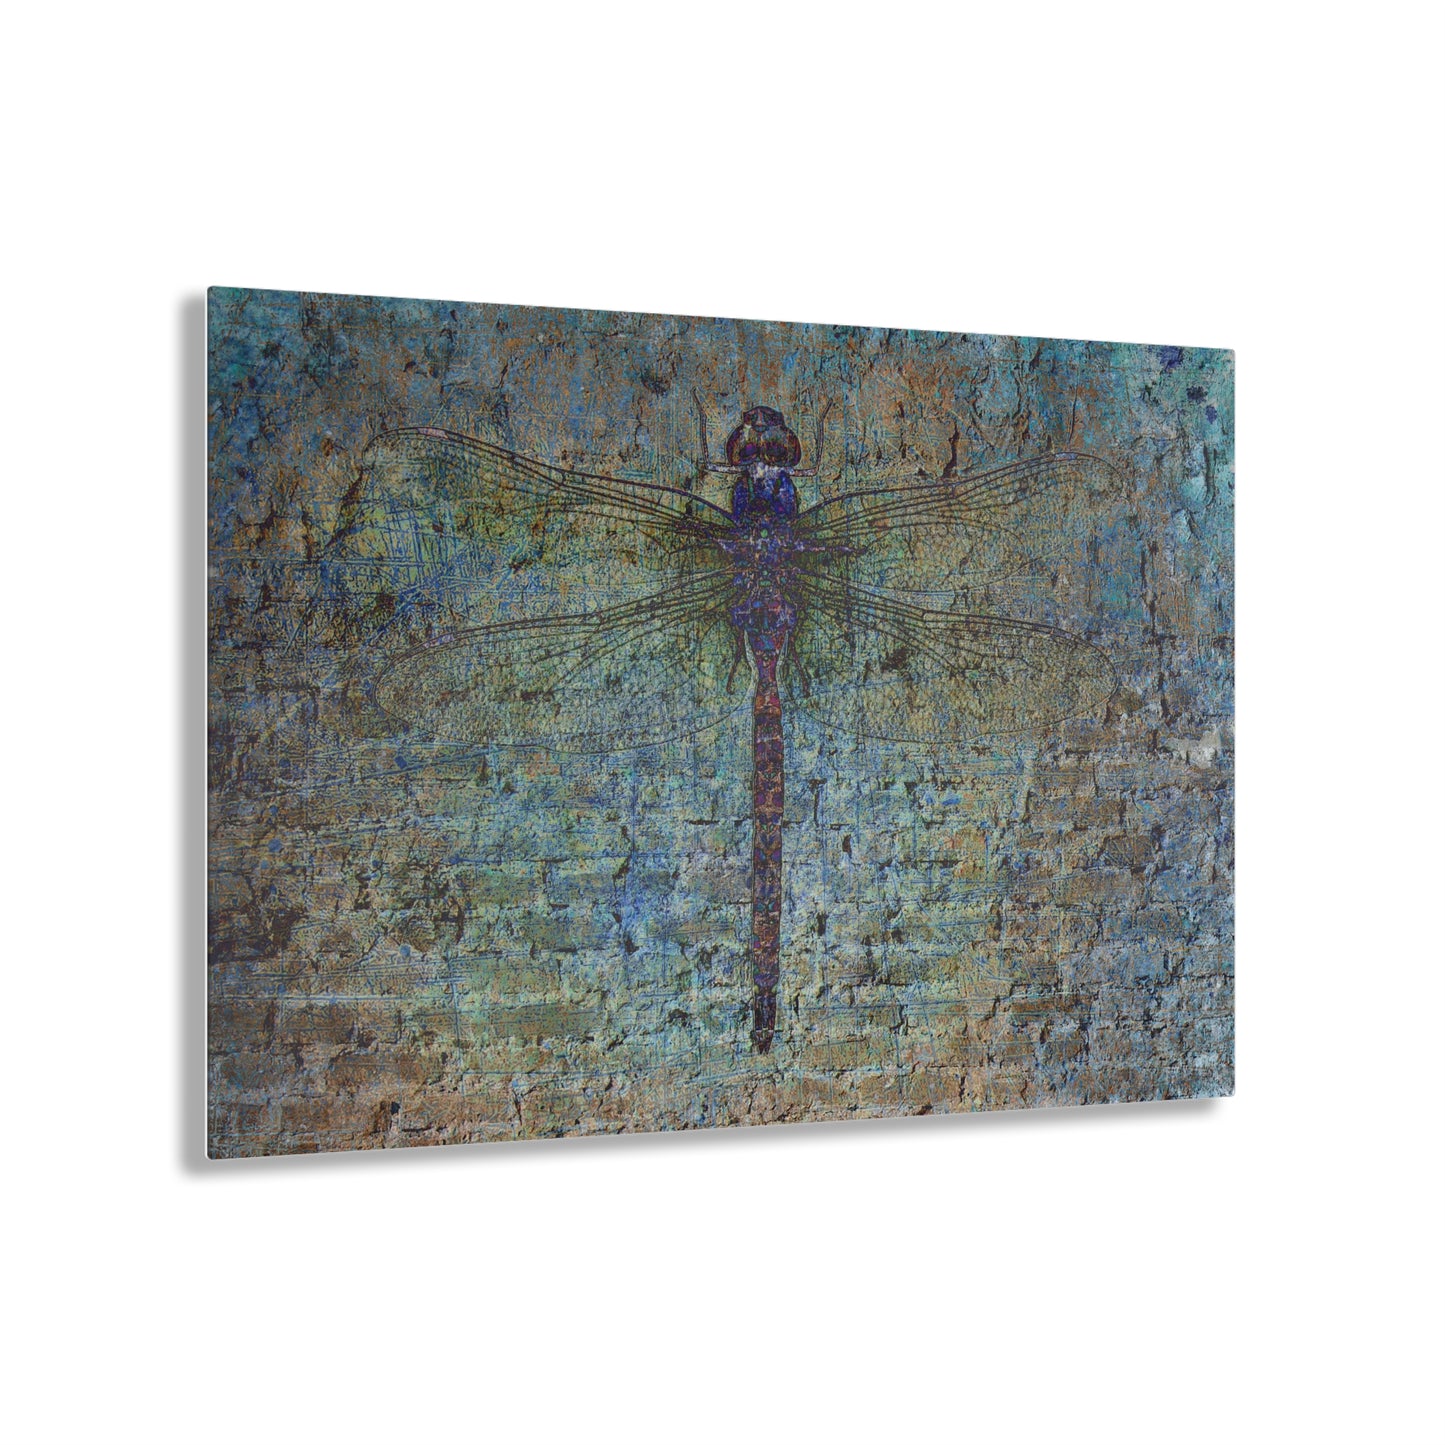 Dragonfly Themed Plexiglass Wall Art - Dragonfly on Distressed Multicolor Brick Wall Printed on a Crystal Clear Acrylic Panel